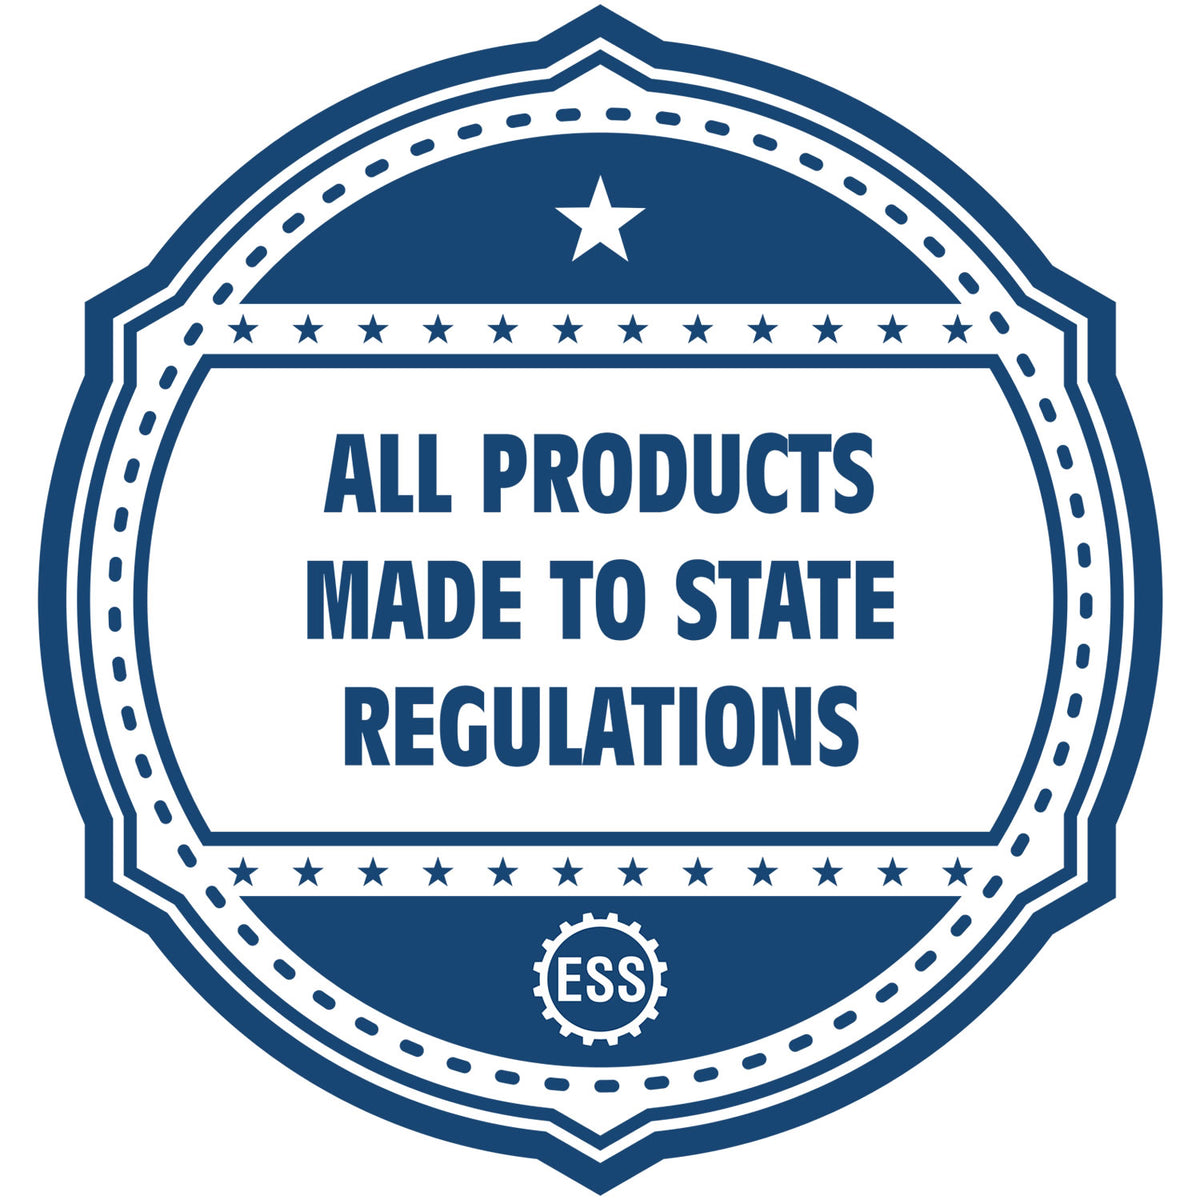 An icon or badge element for the Soft New Hampshire Professional Engineer Seal showing that this product is made in compliance with state regulations.